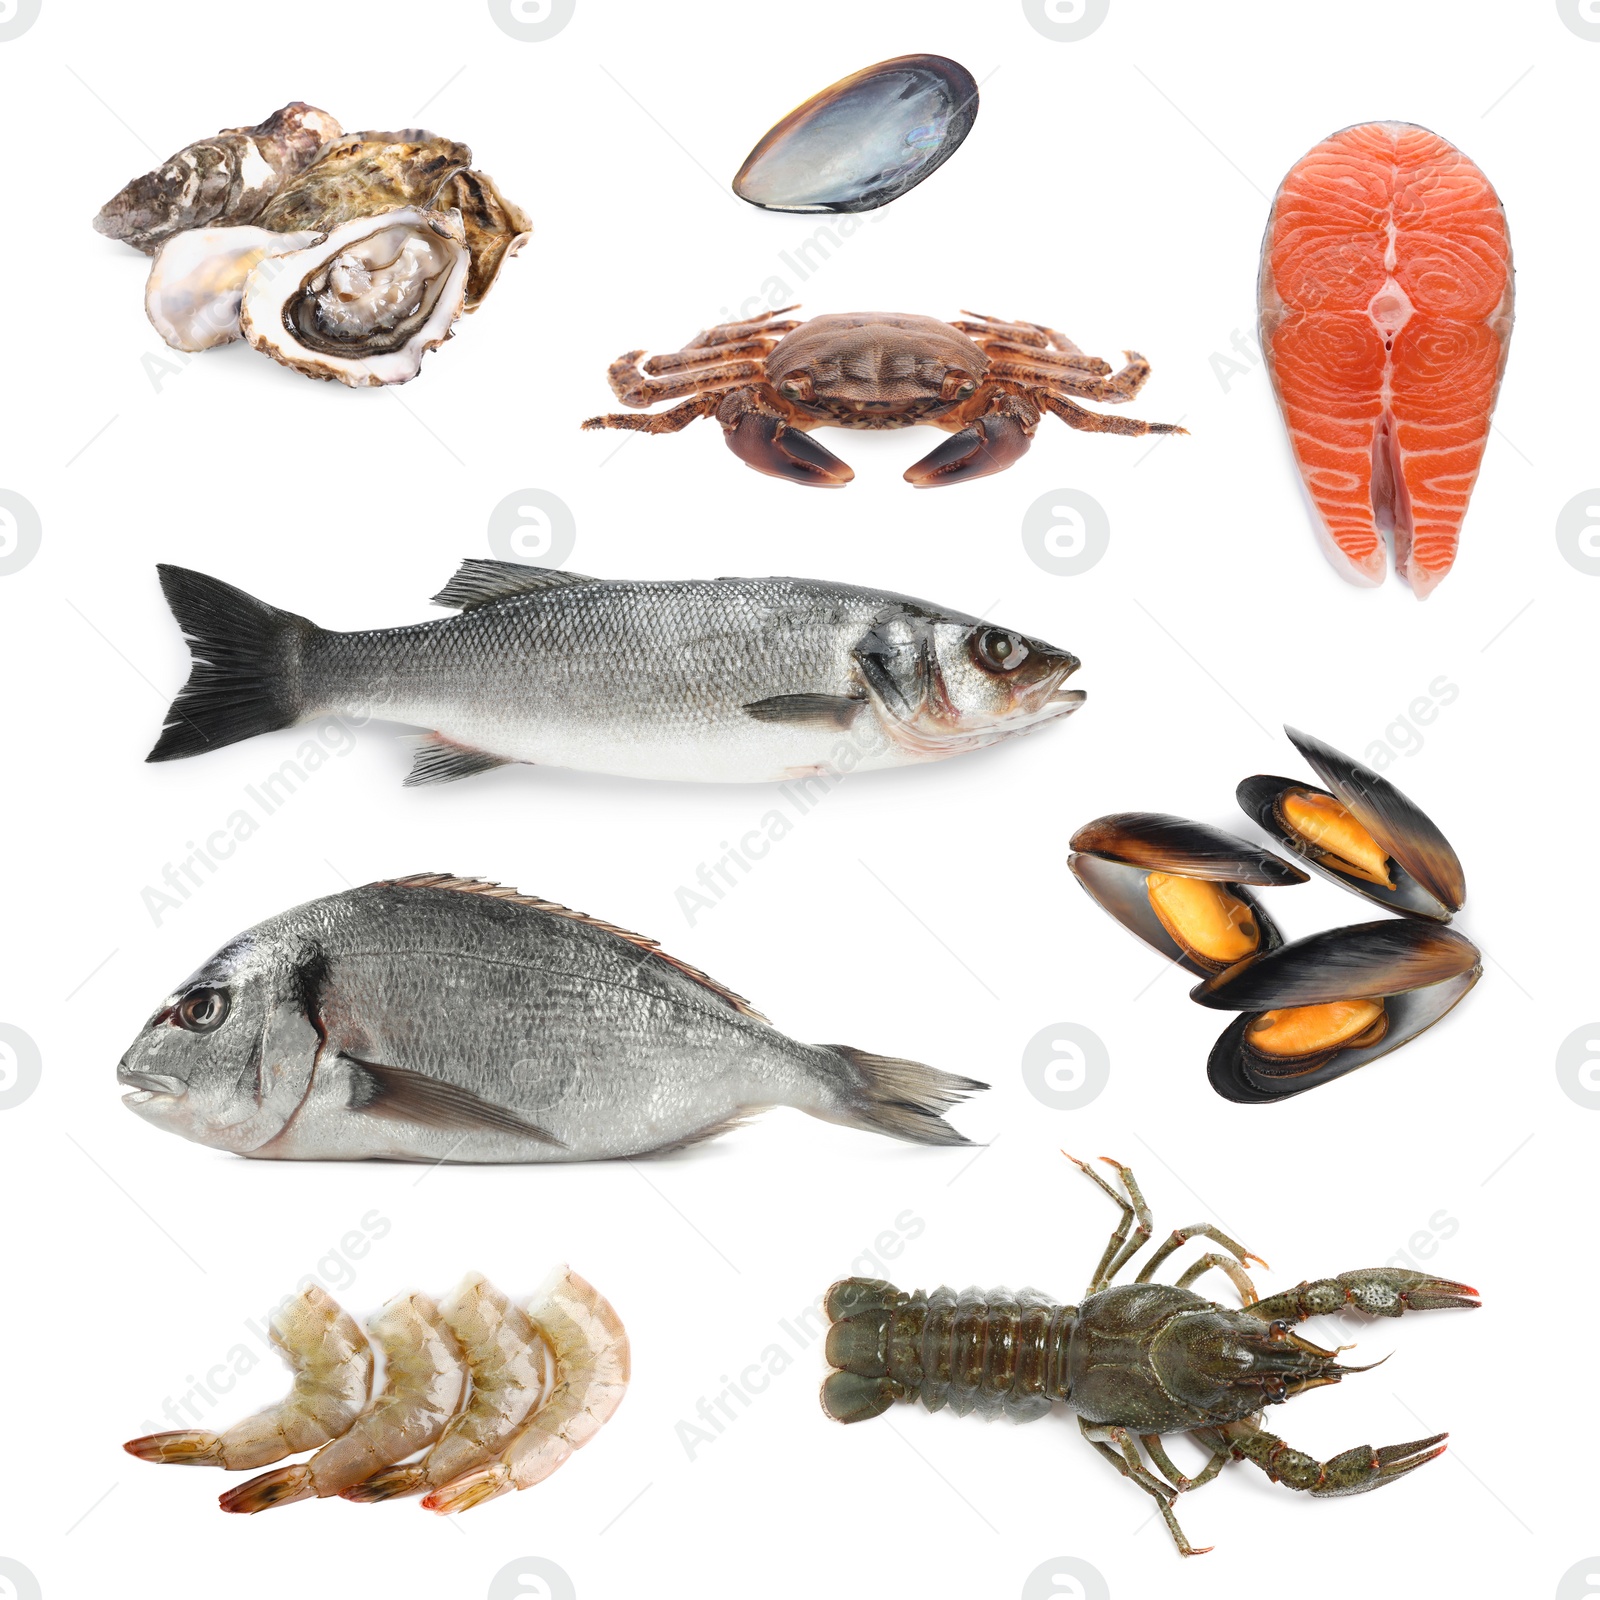 Image of Dorado fish and other seafood isolated on white, set